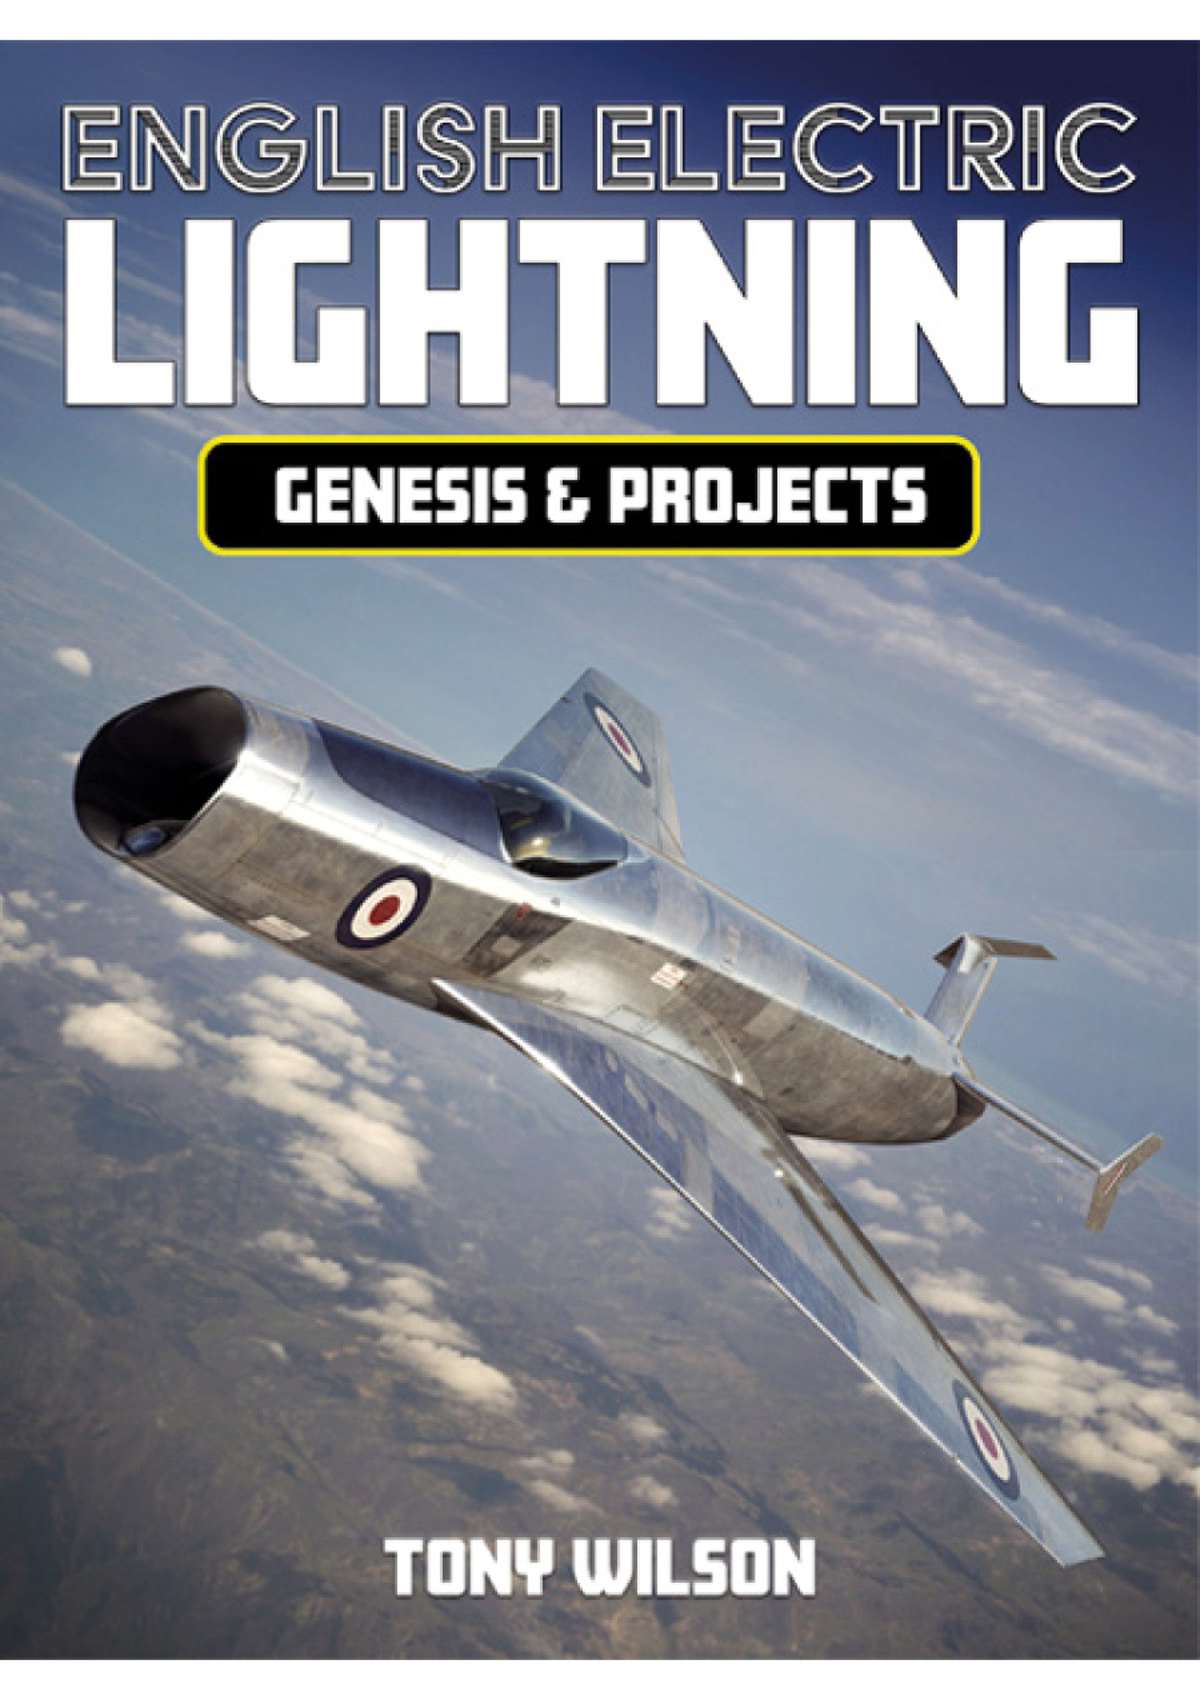 English Electric Lightning Genesis and Projects